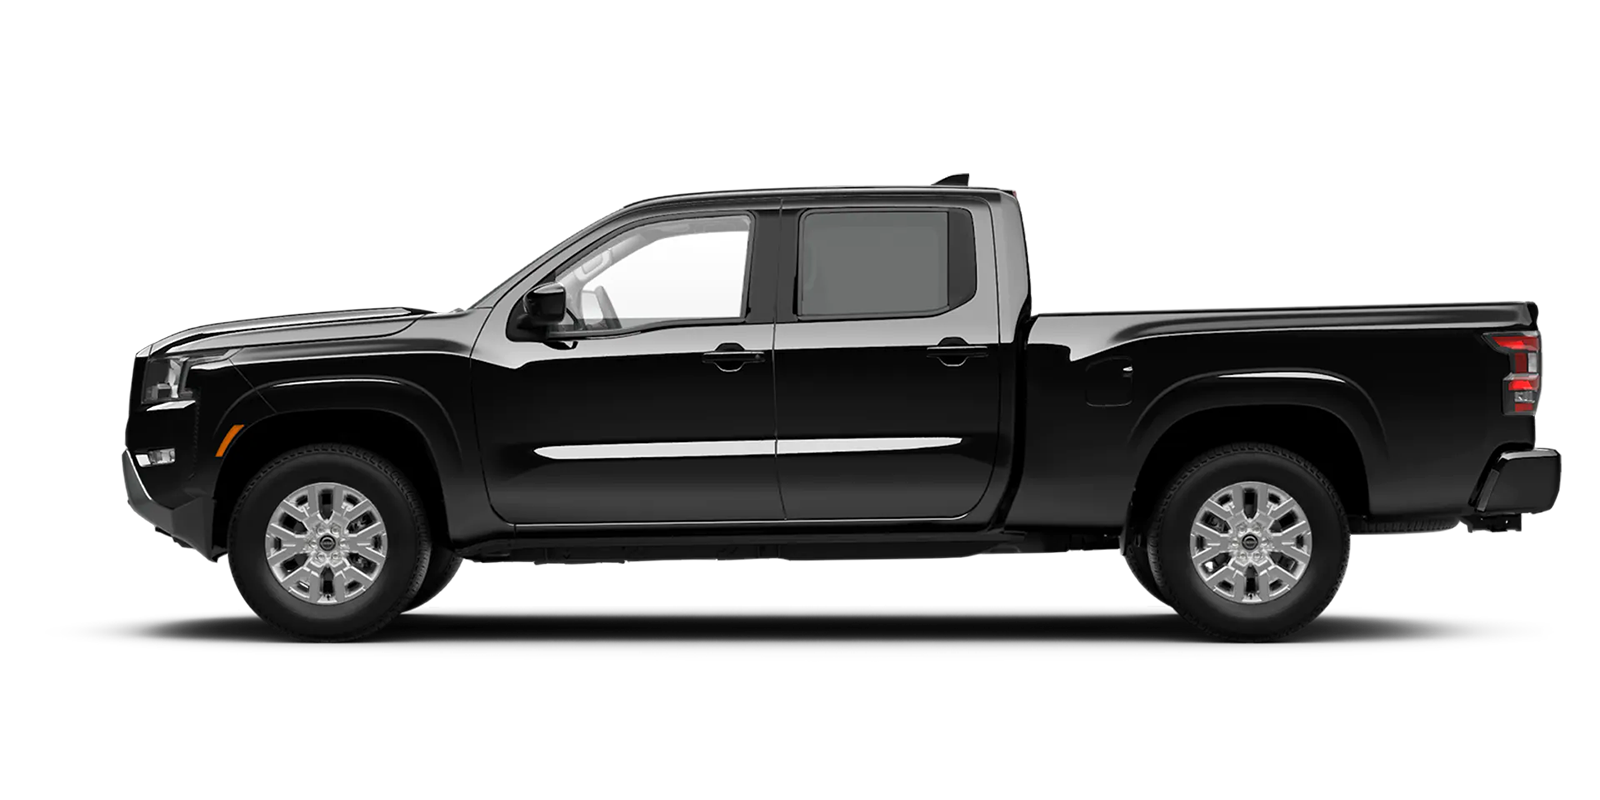 2022 Frontier Crew Cab Long Bed SV 4x4 in Super Black | Nationwide Nissan in Timonium MD